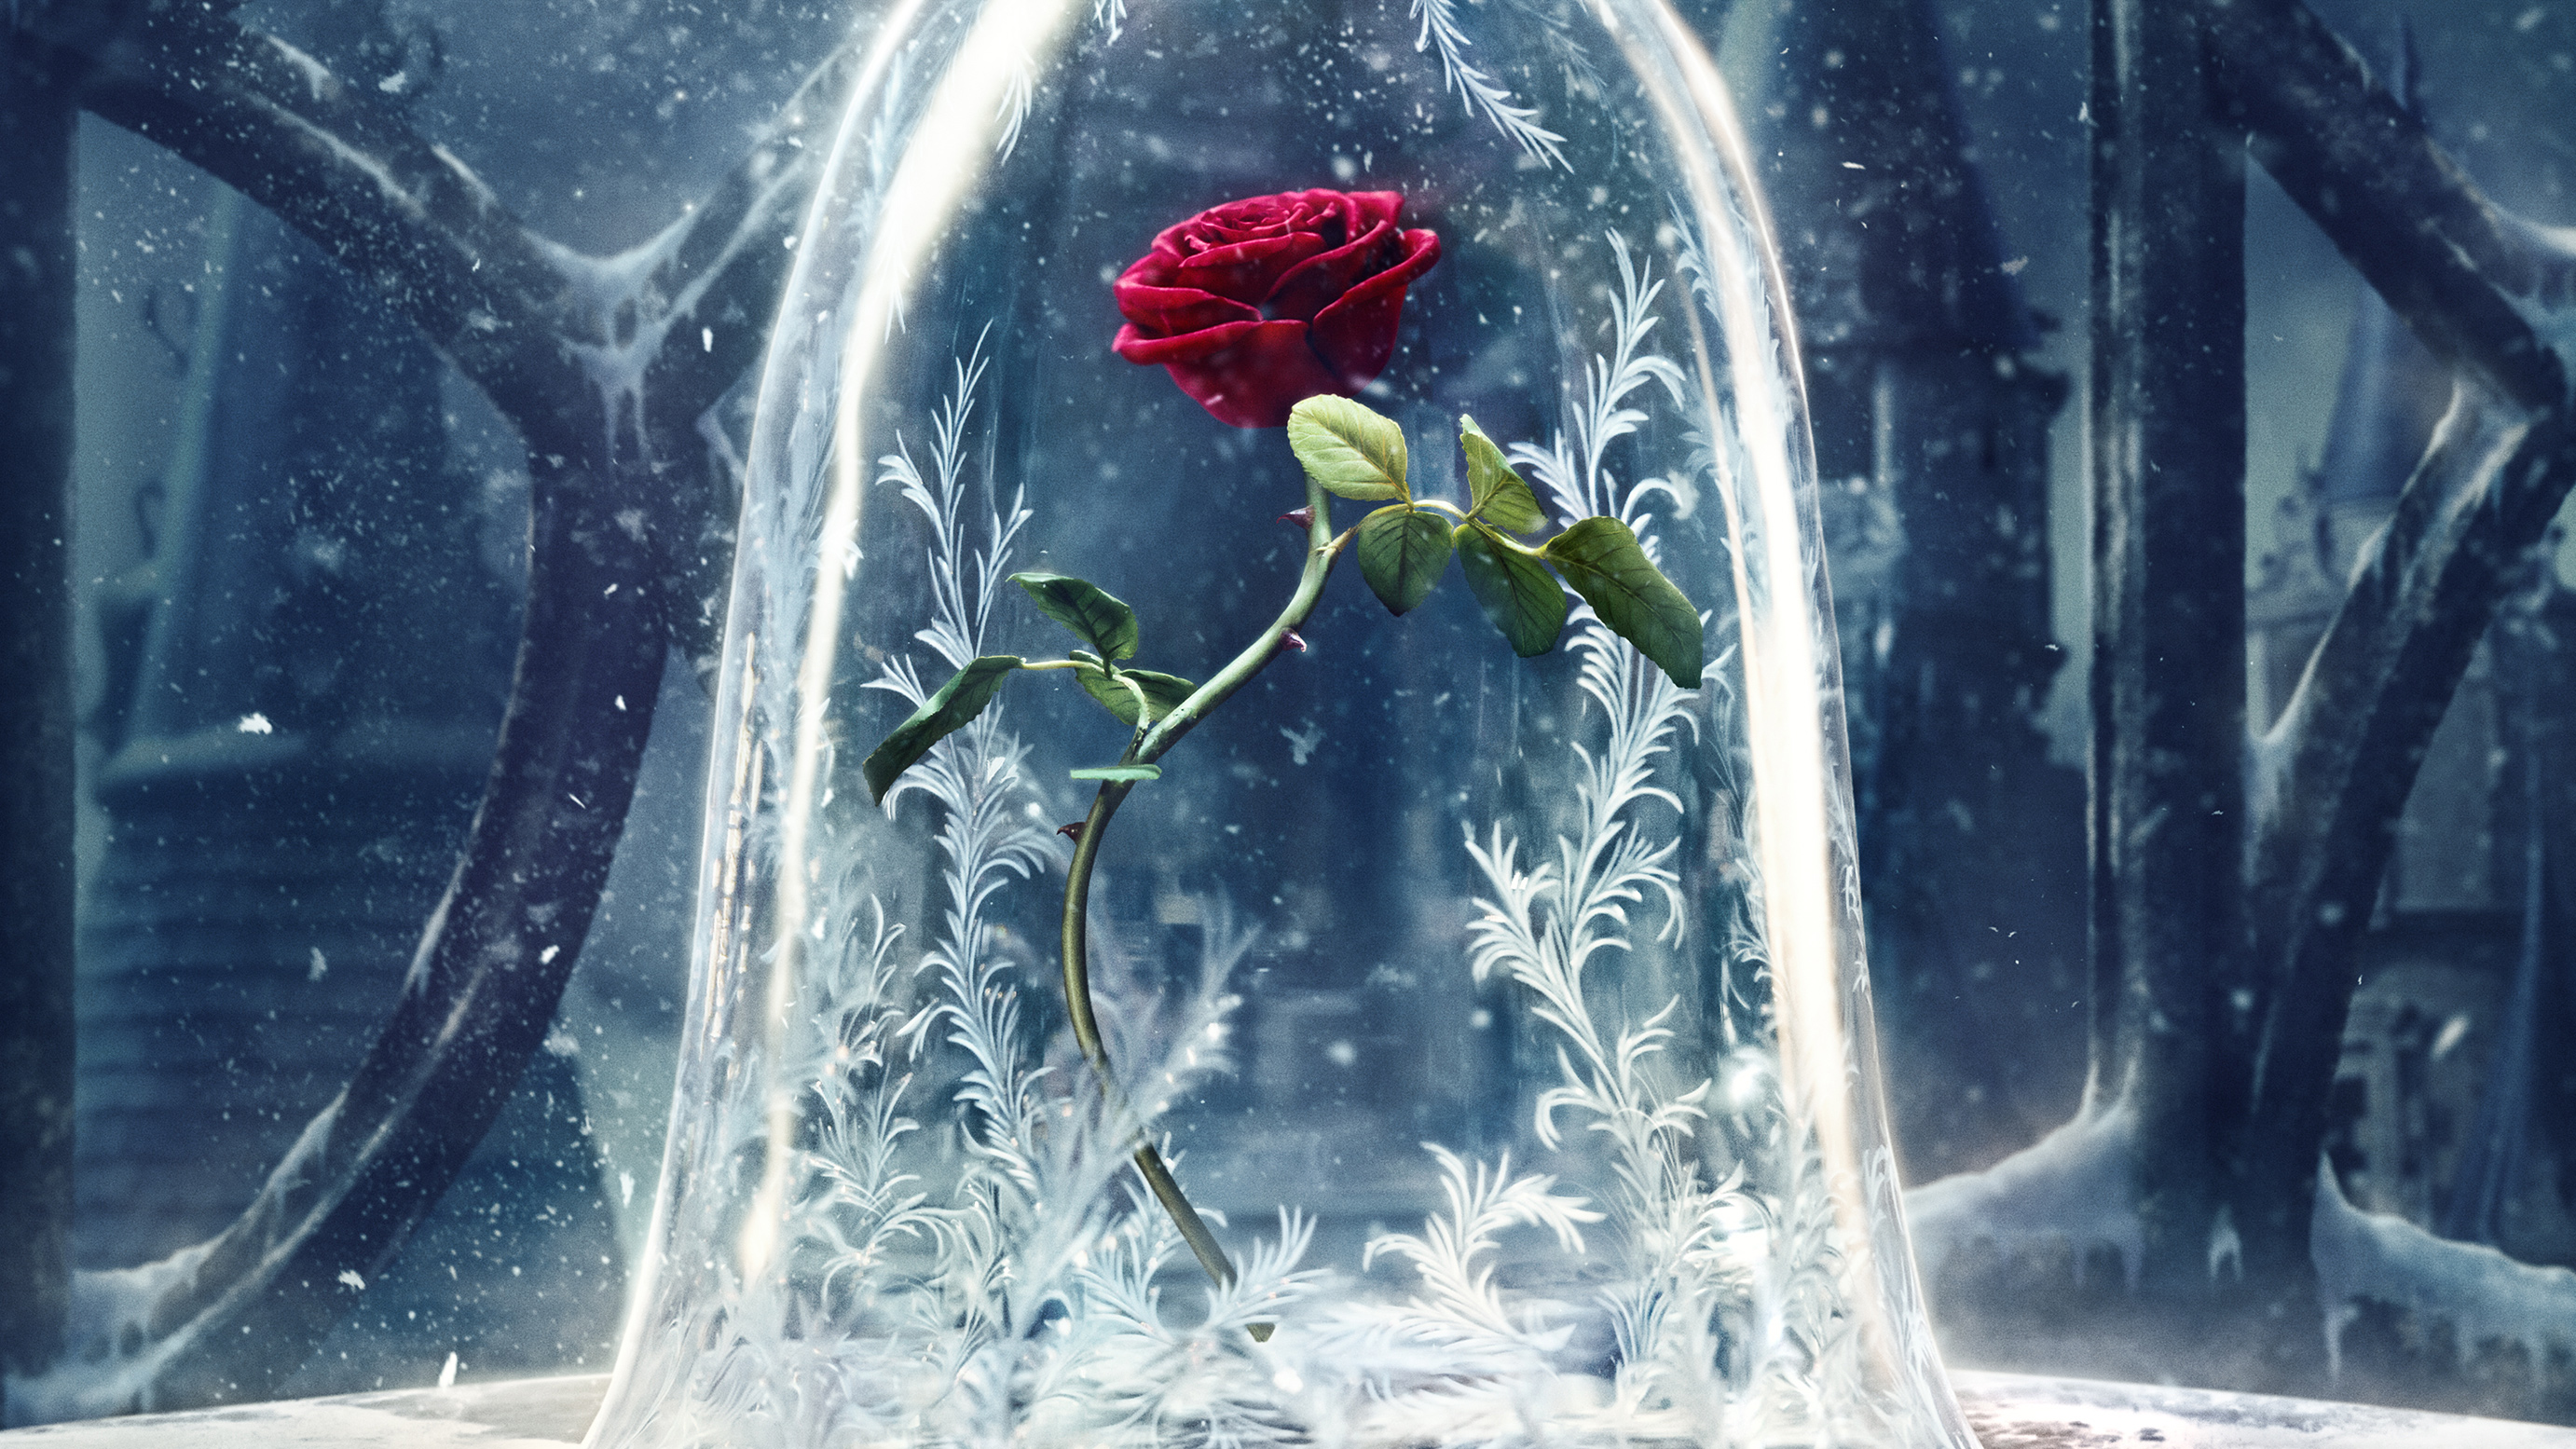 beauty and the beast 2764x1555 2017 movies disney rose 1261